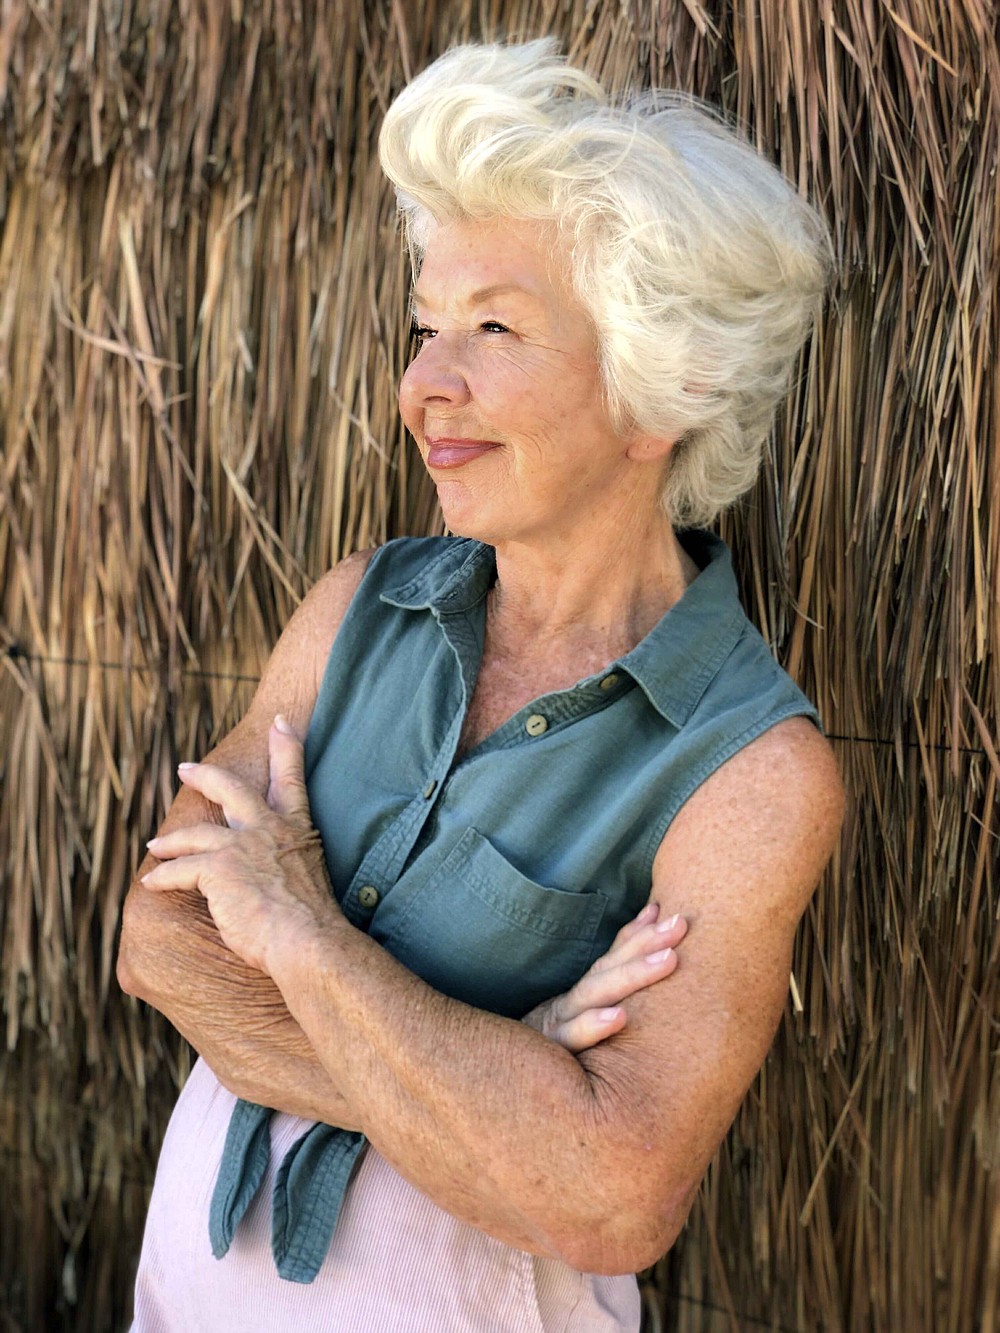 This photo shows Joan MacDonald, 75, in Tulum, Mexico, on Sept. 1, 2020. MacDonald is among a growing number of “grandfluencers,” folks 70 and up who are making names for themselves on social media. (Michelle MacDonald via AP)